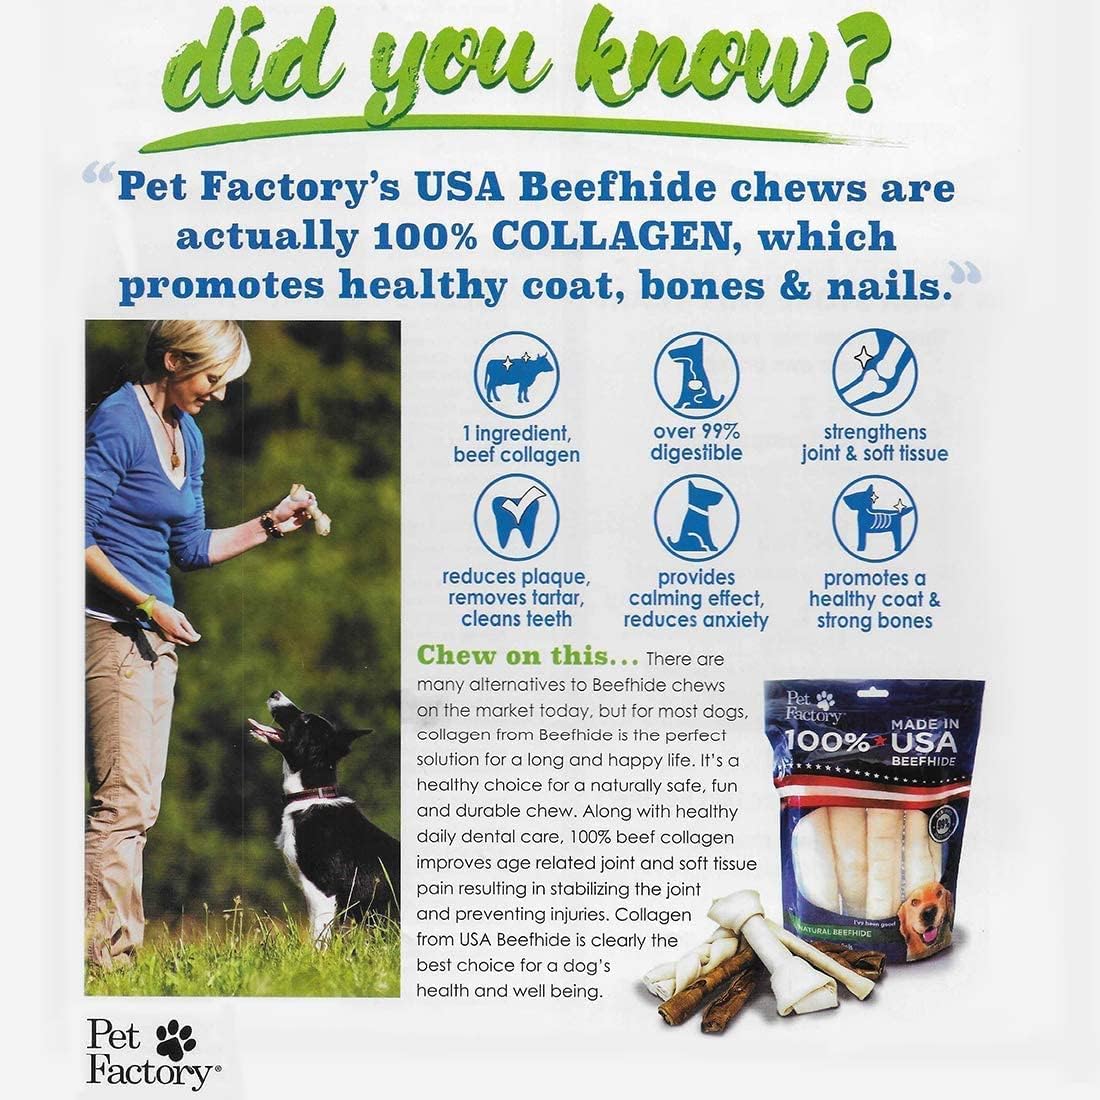 Pet Factory 100% Made in USA Beefhide Chips Dog Chew Treats - Natural Flavor, 8 oz : Pet Supplies